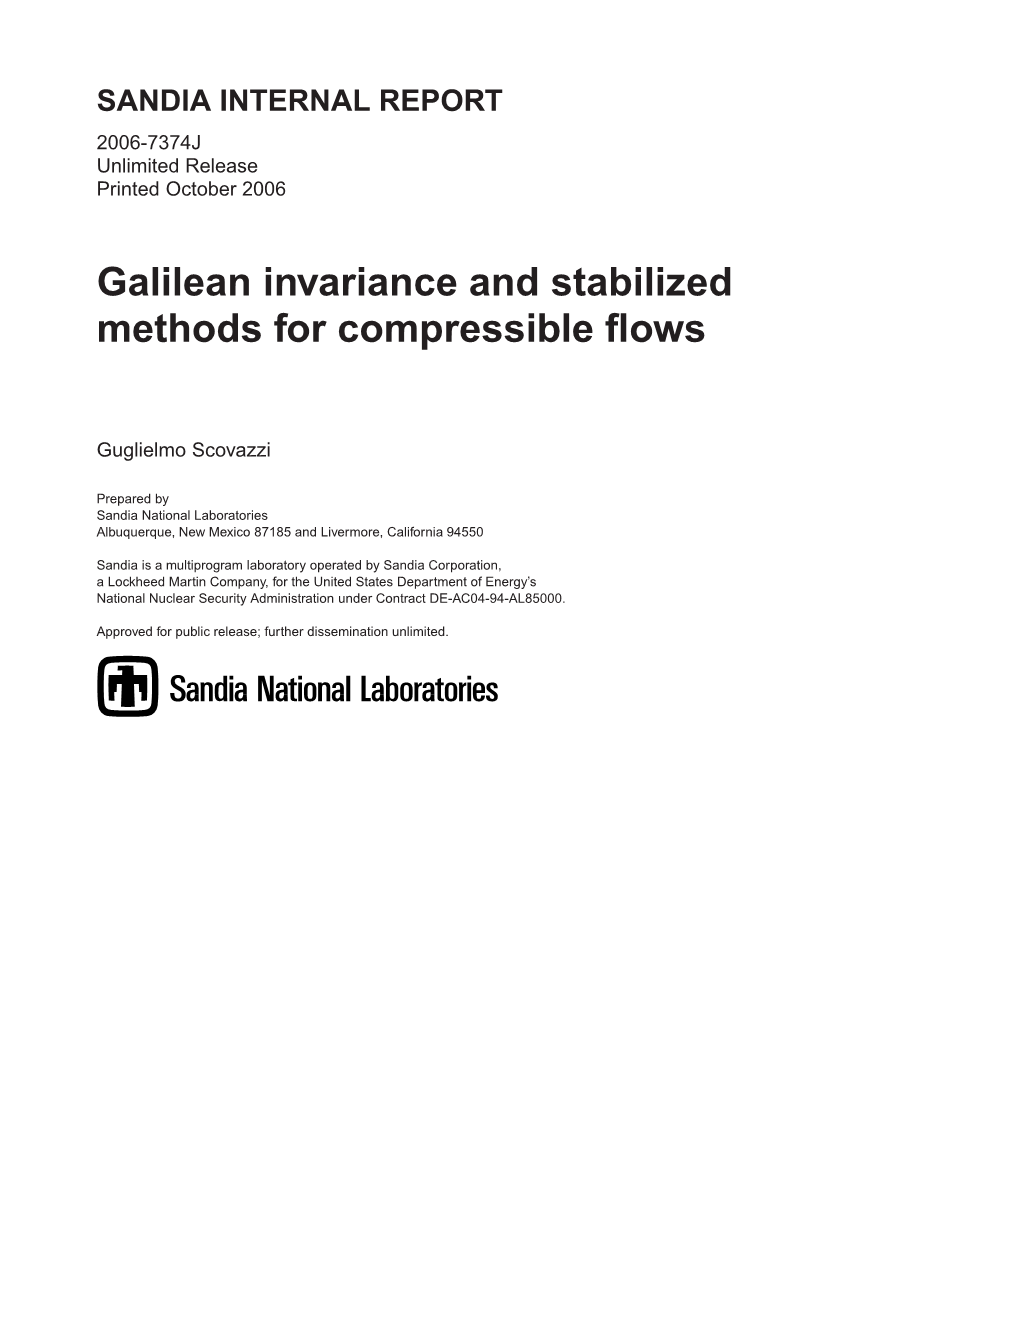 Galilean Invariance and Stabilized Methods for Compressible Flows